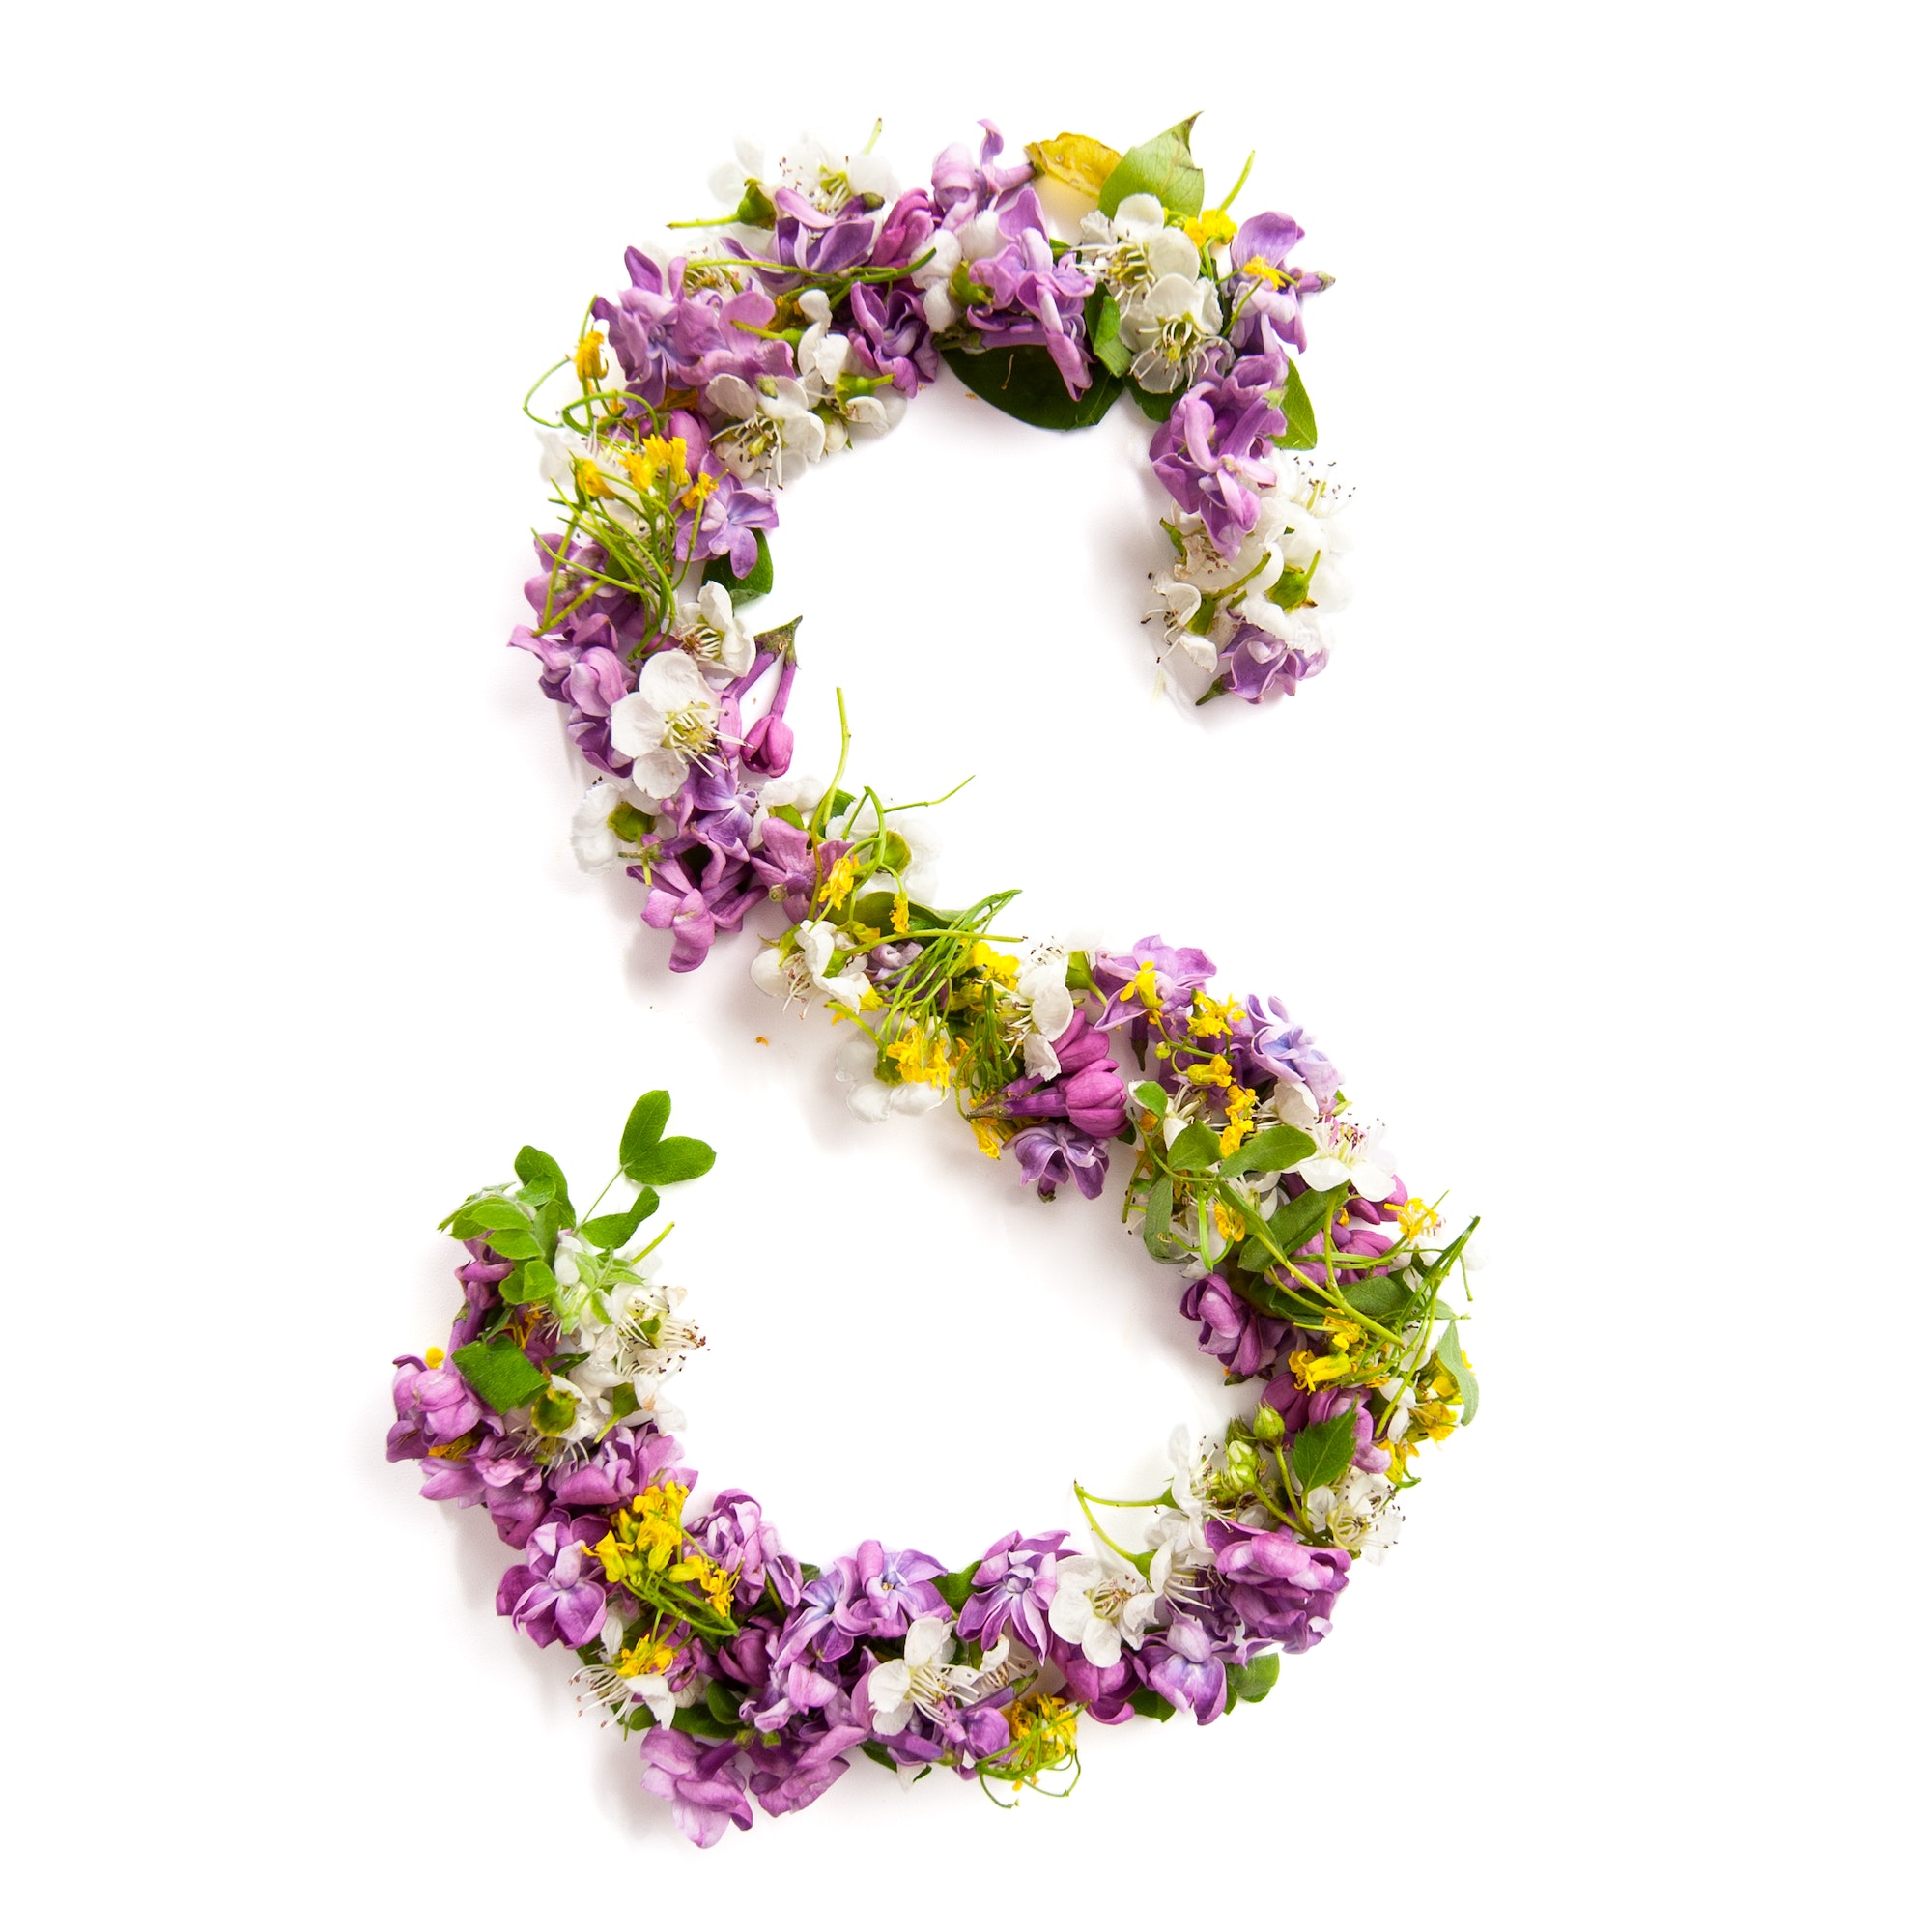 The letter «S» made of various natural small flowers.